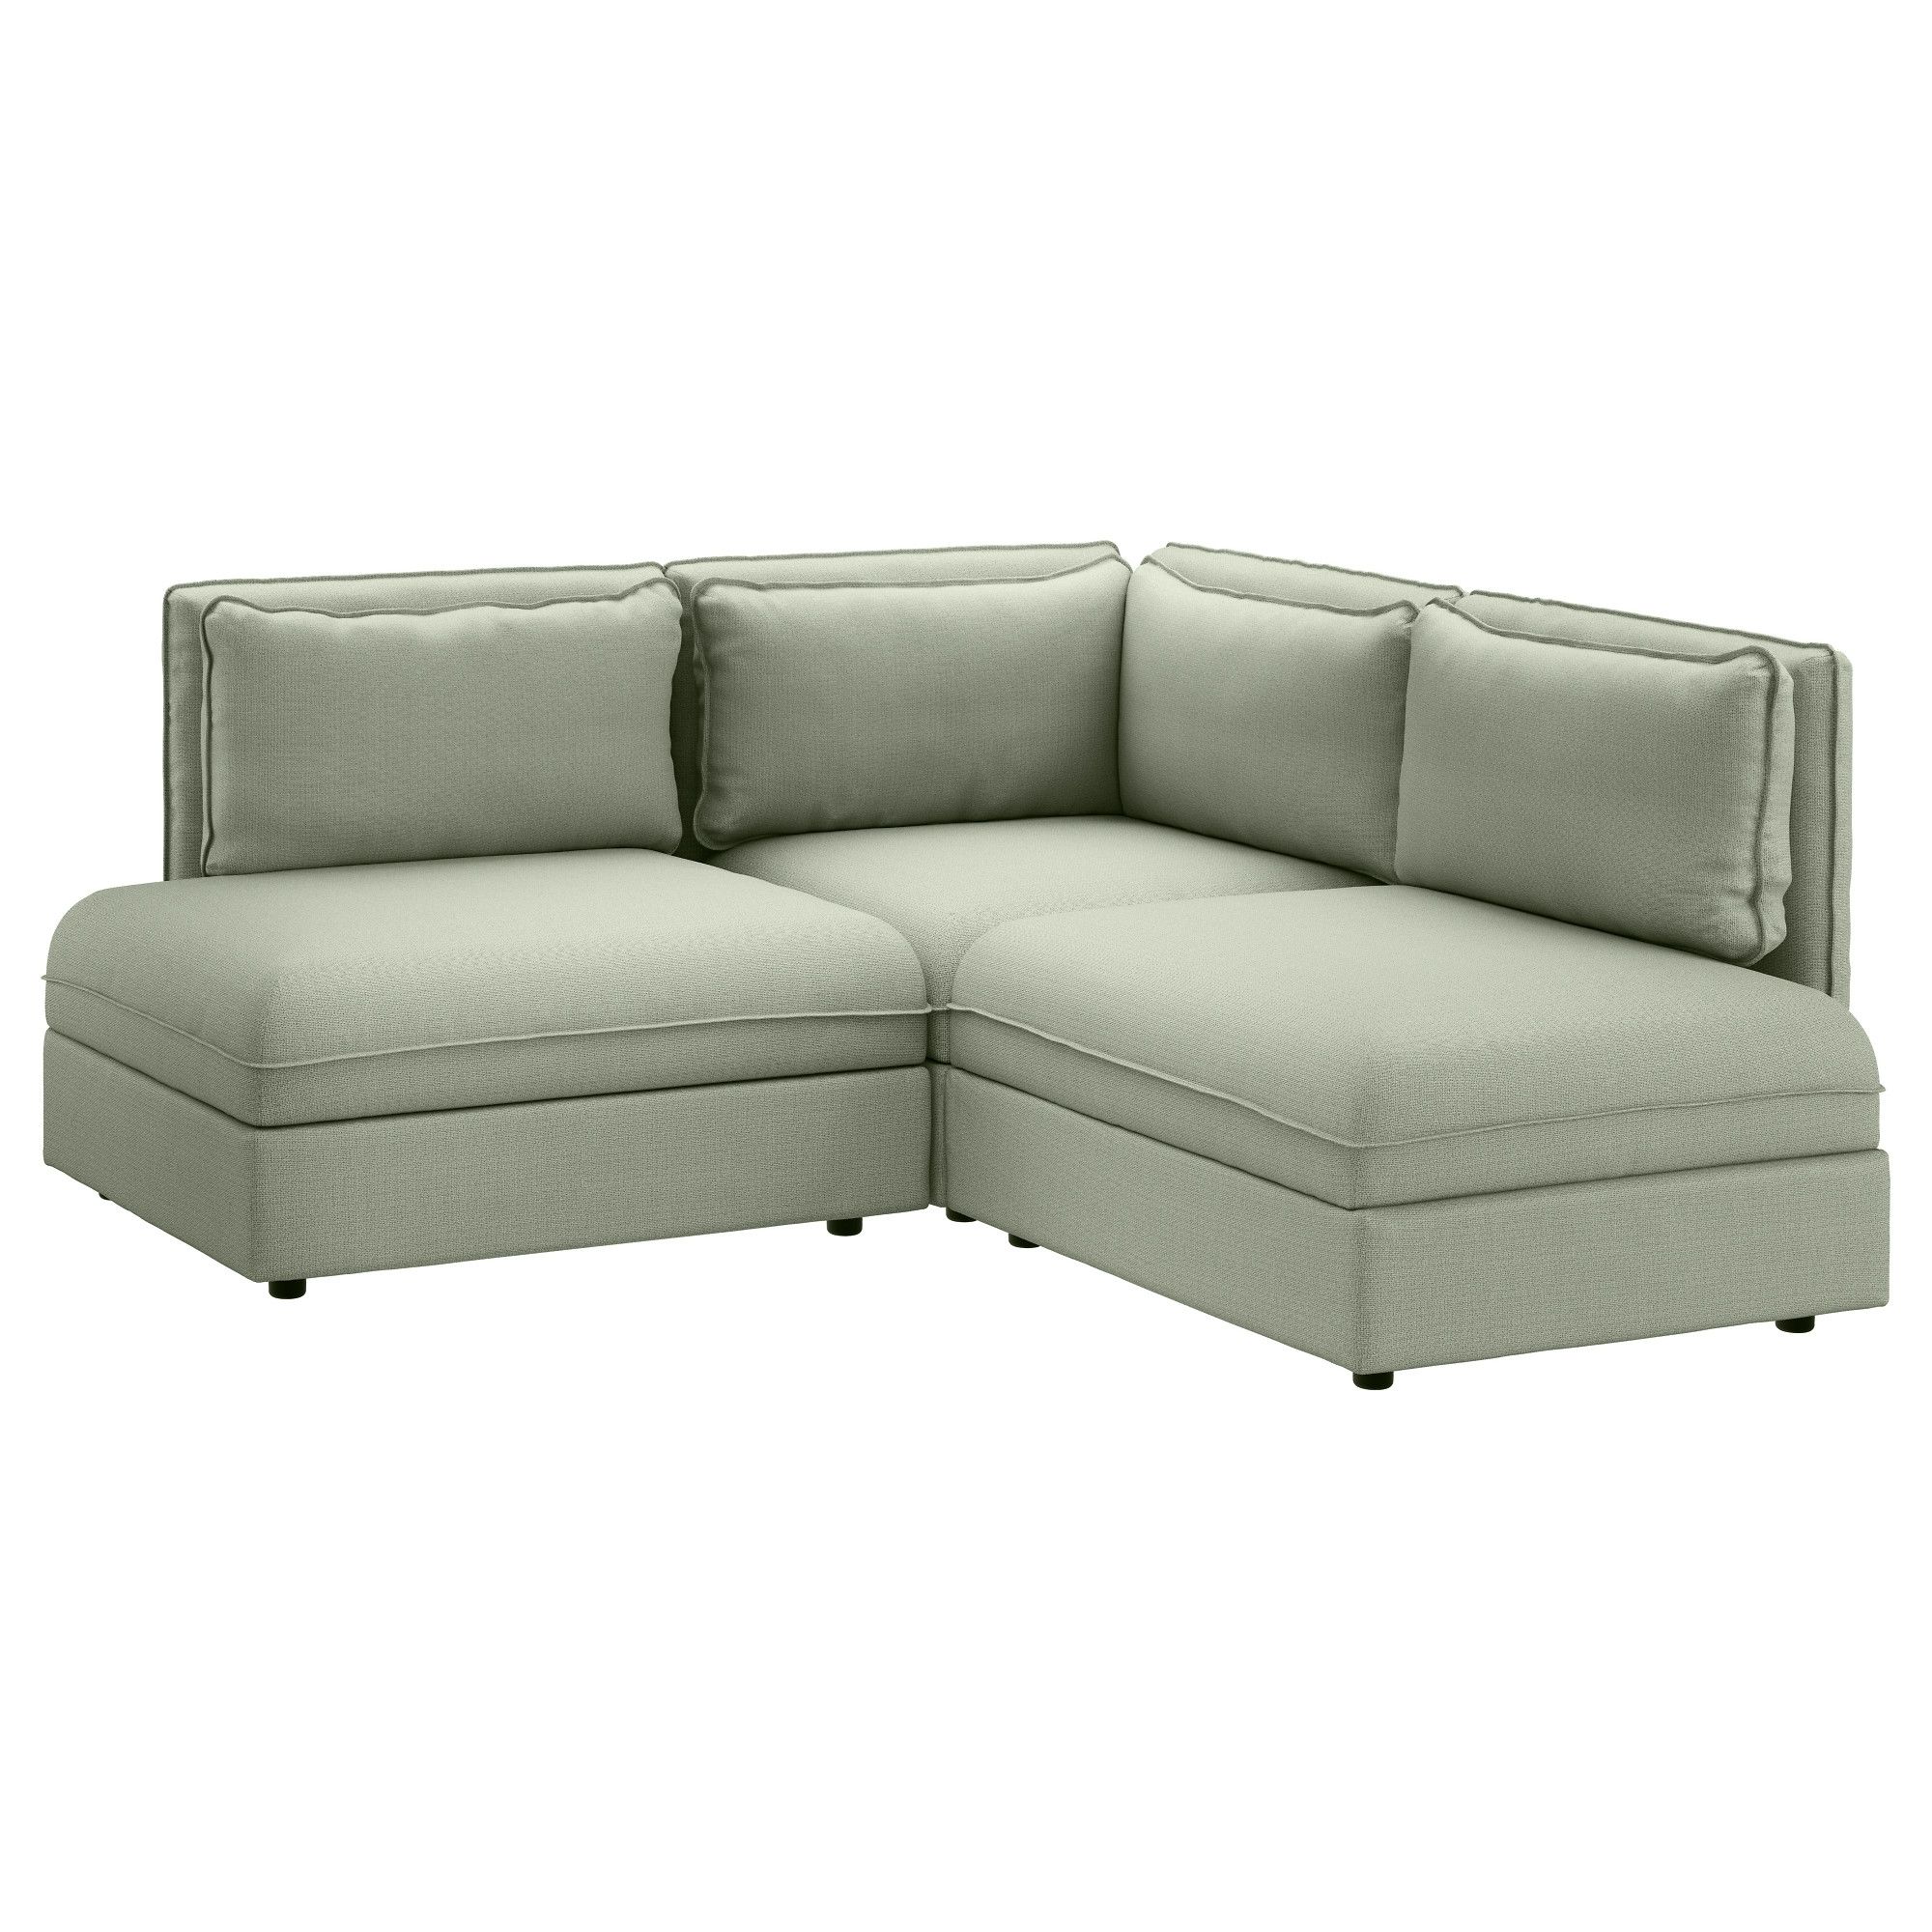 Best And Newest Luxury Sectional Sofas Ikea 94 Sofas And Couches Ideas With Regarding Sectional Sofas At Ikea (View 6 of 15)